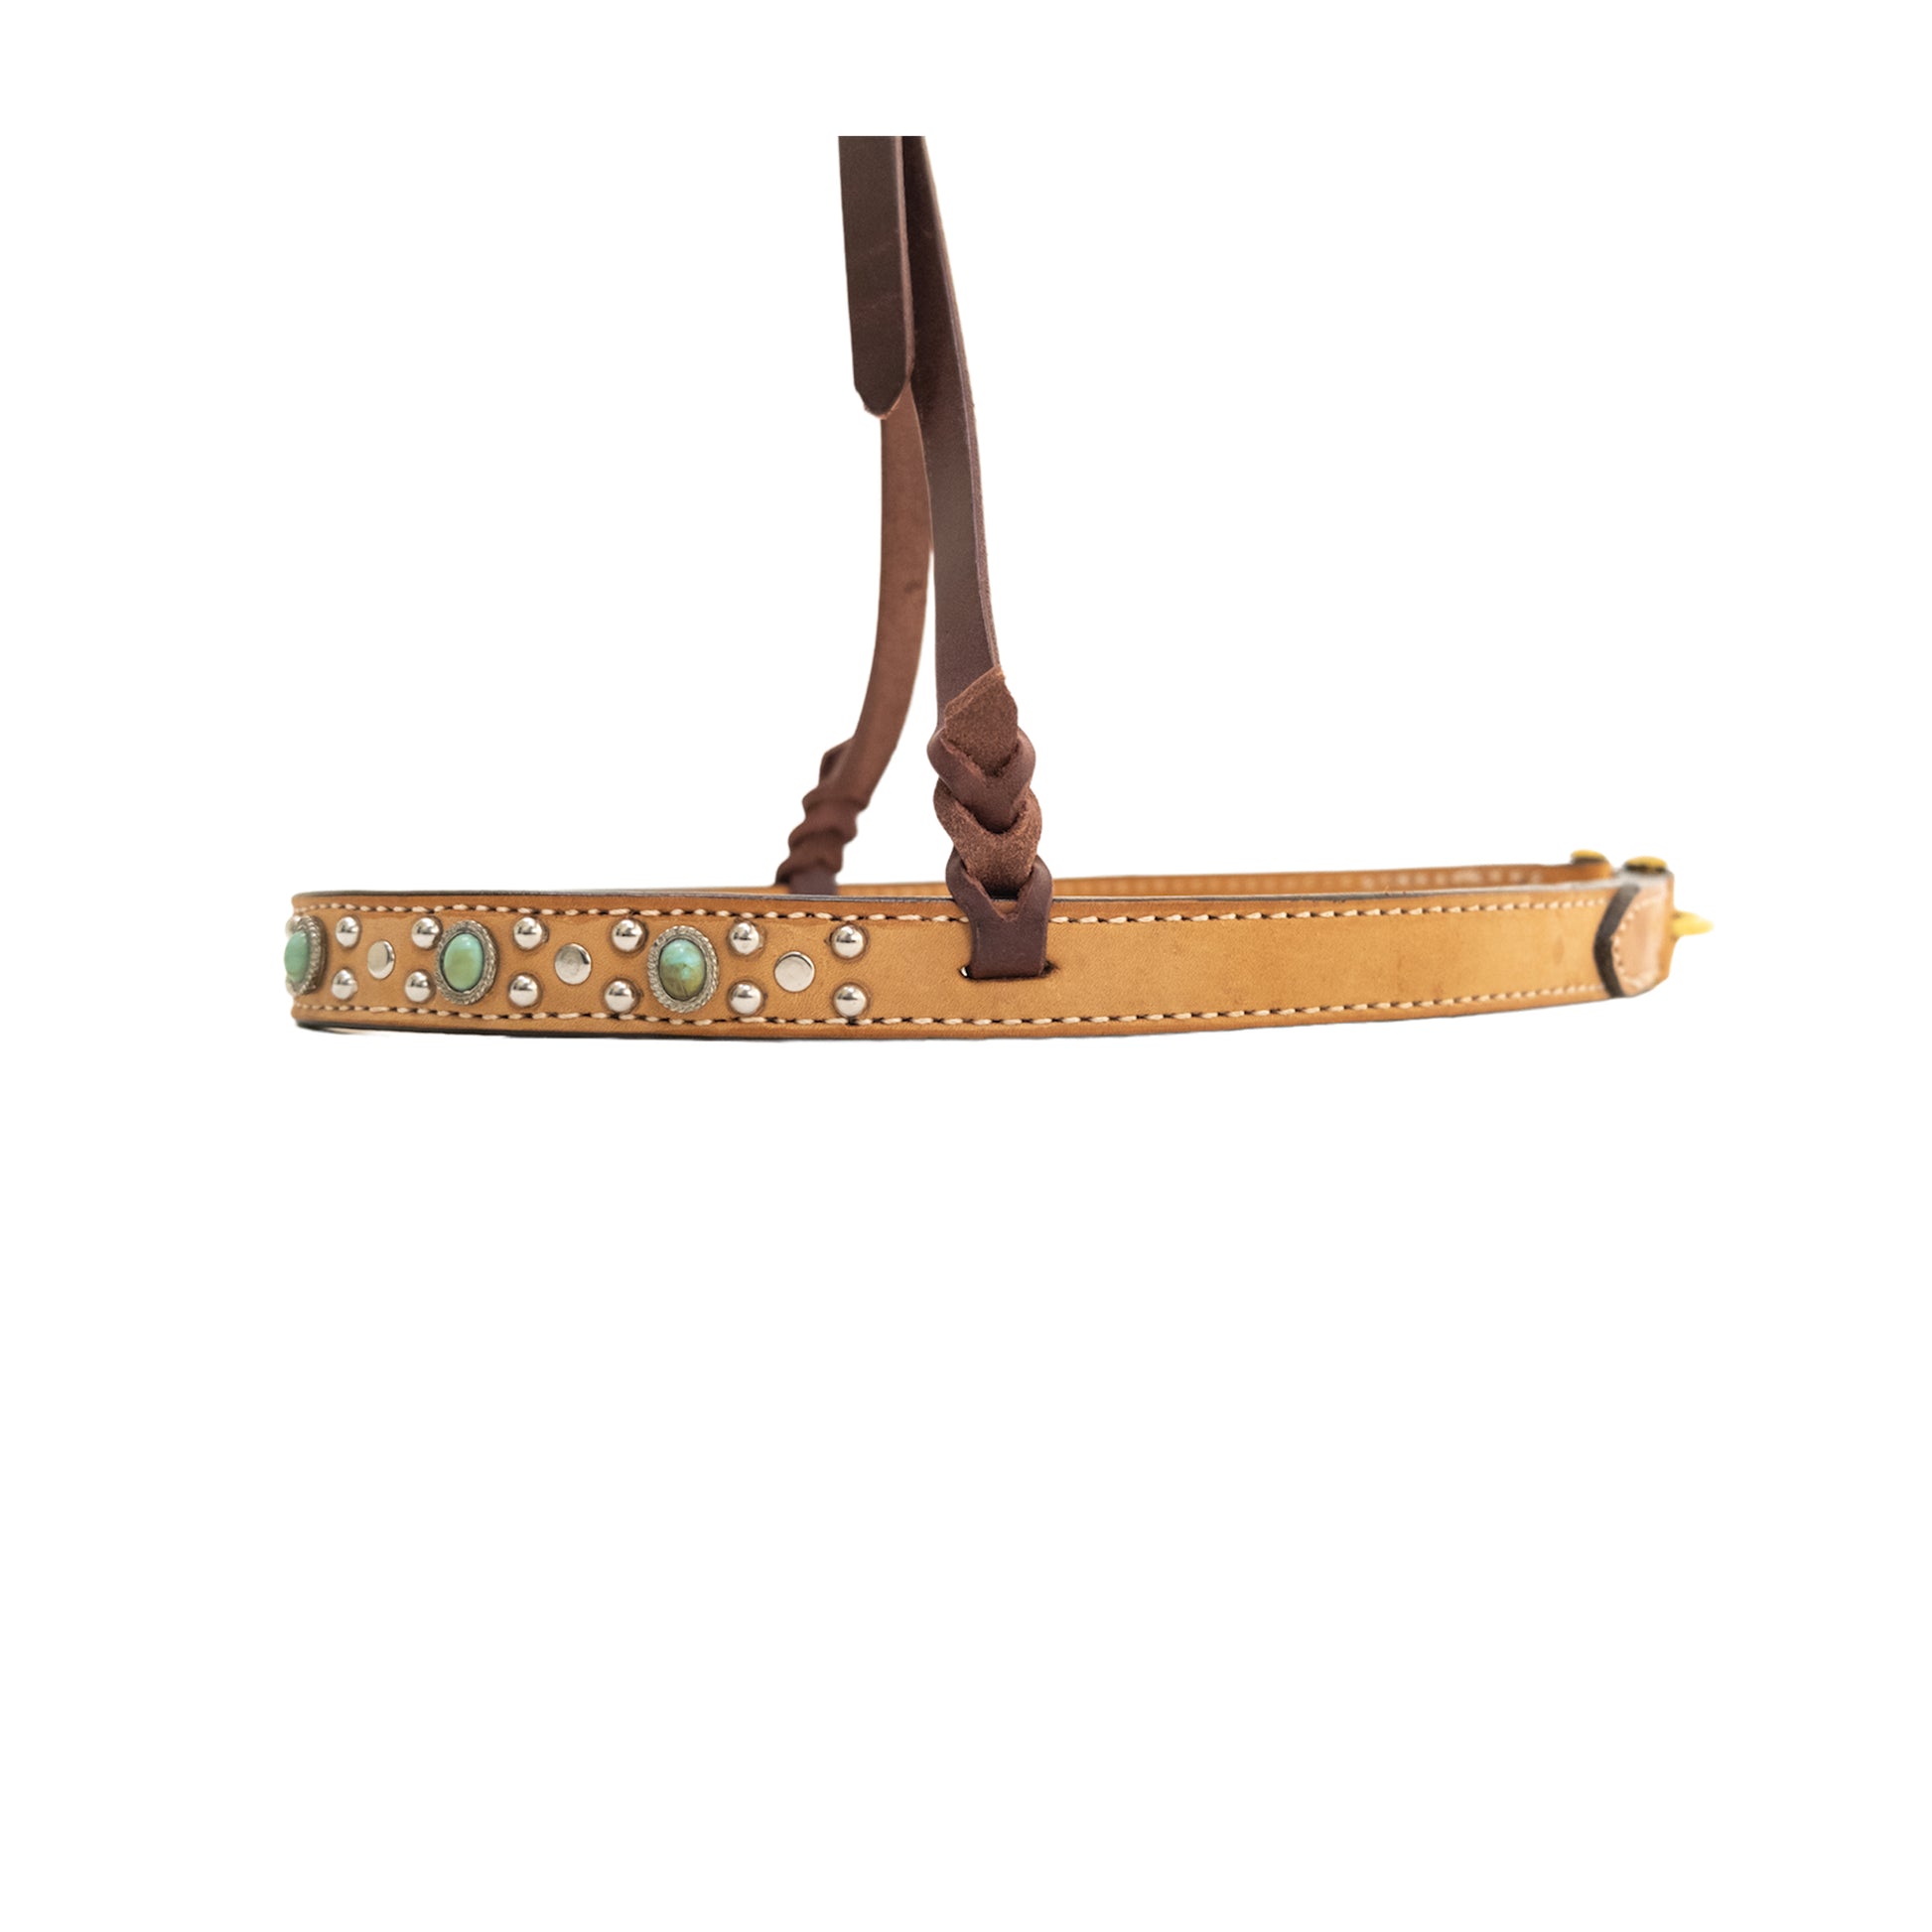 Noseband rough out golden leather with turquoise stones and SS spots.